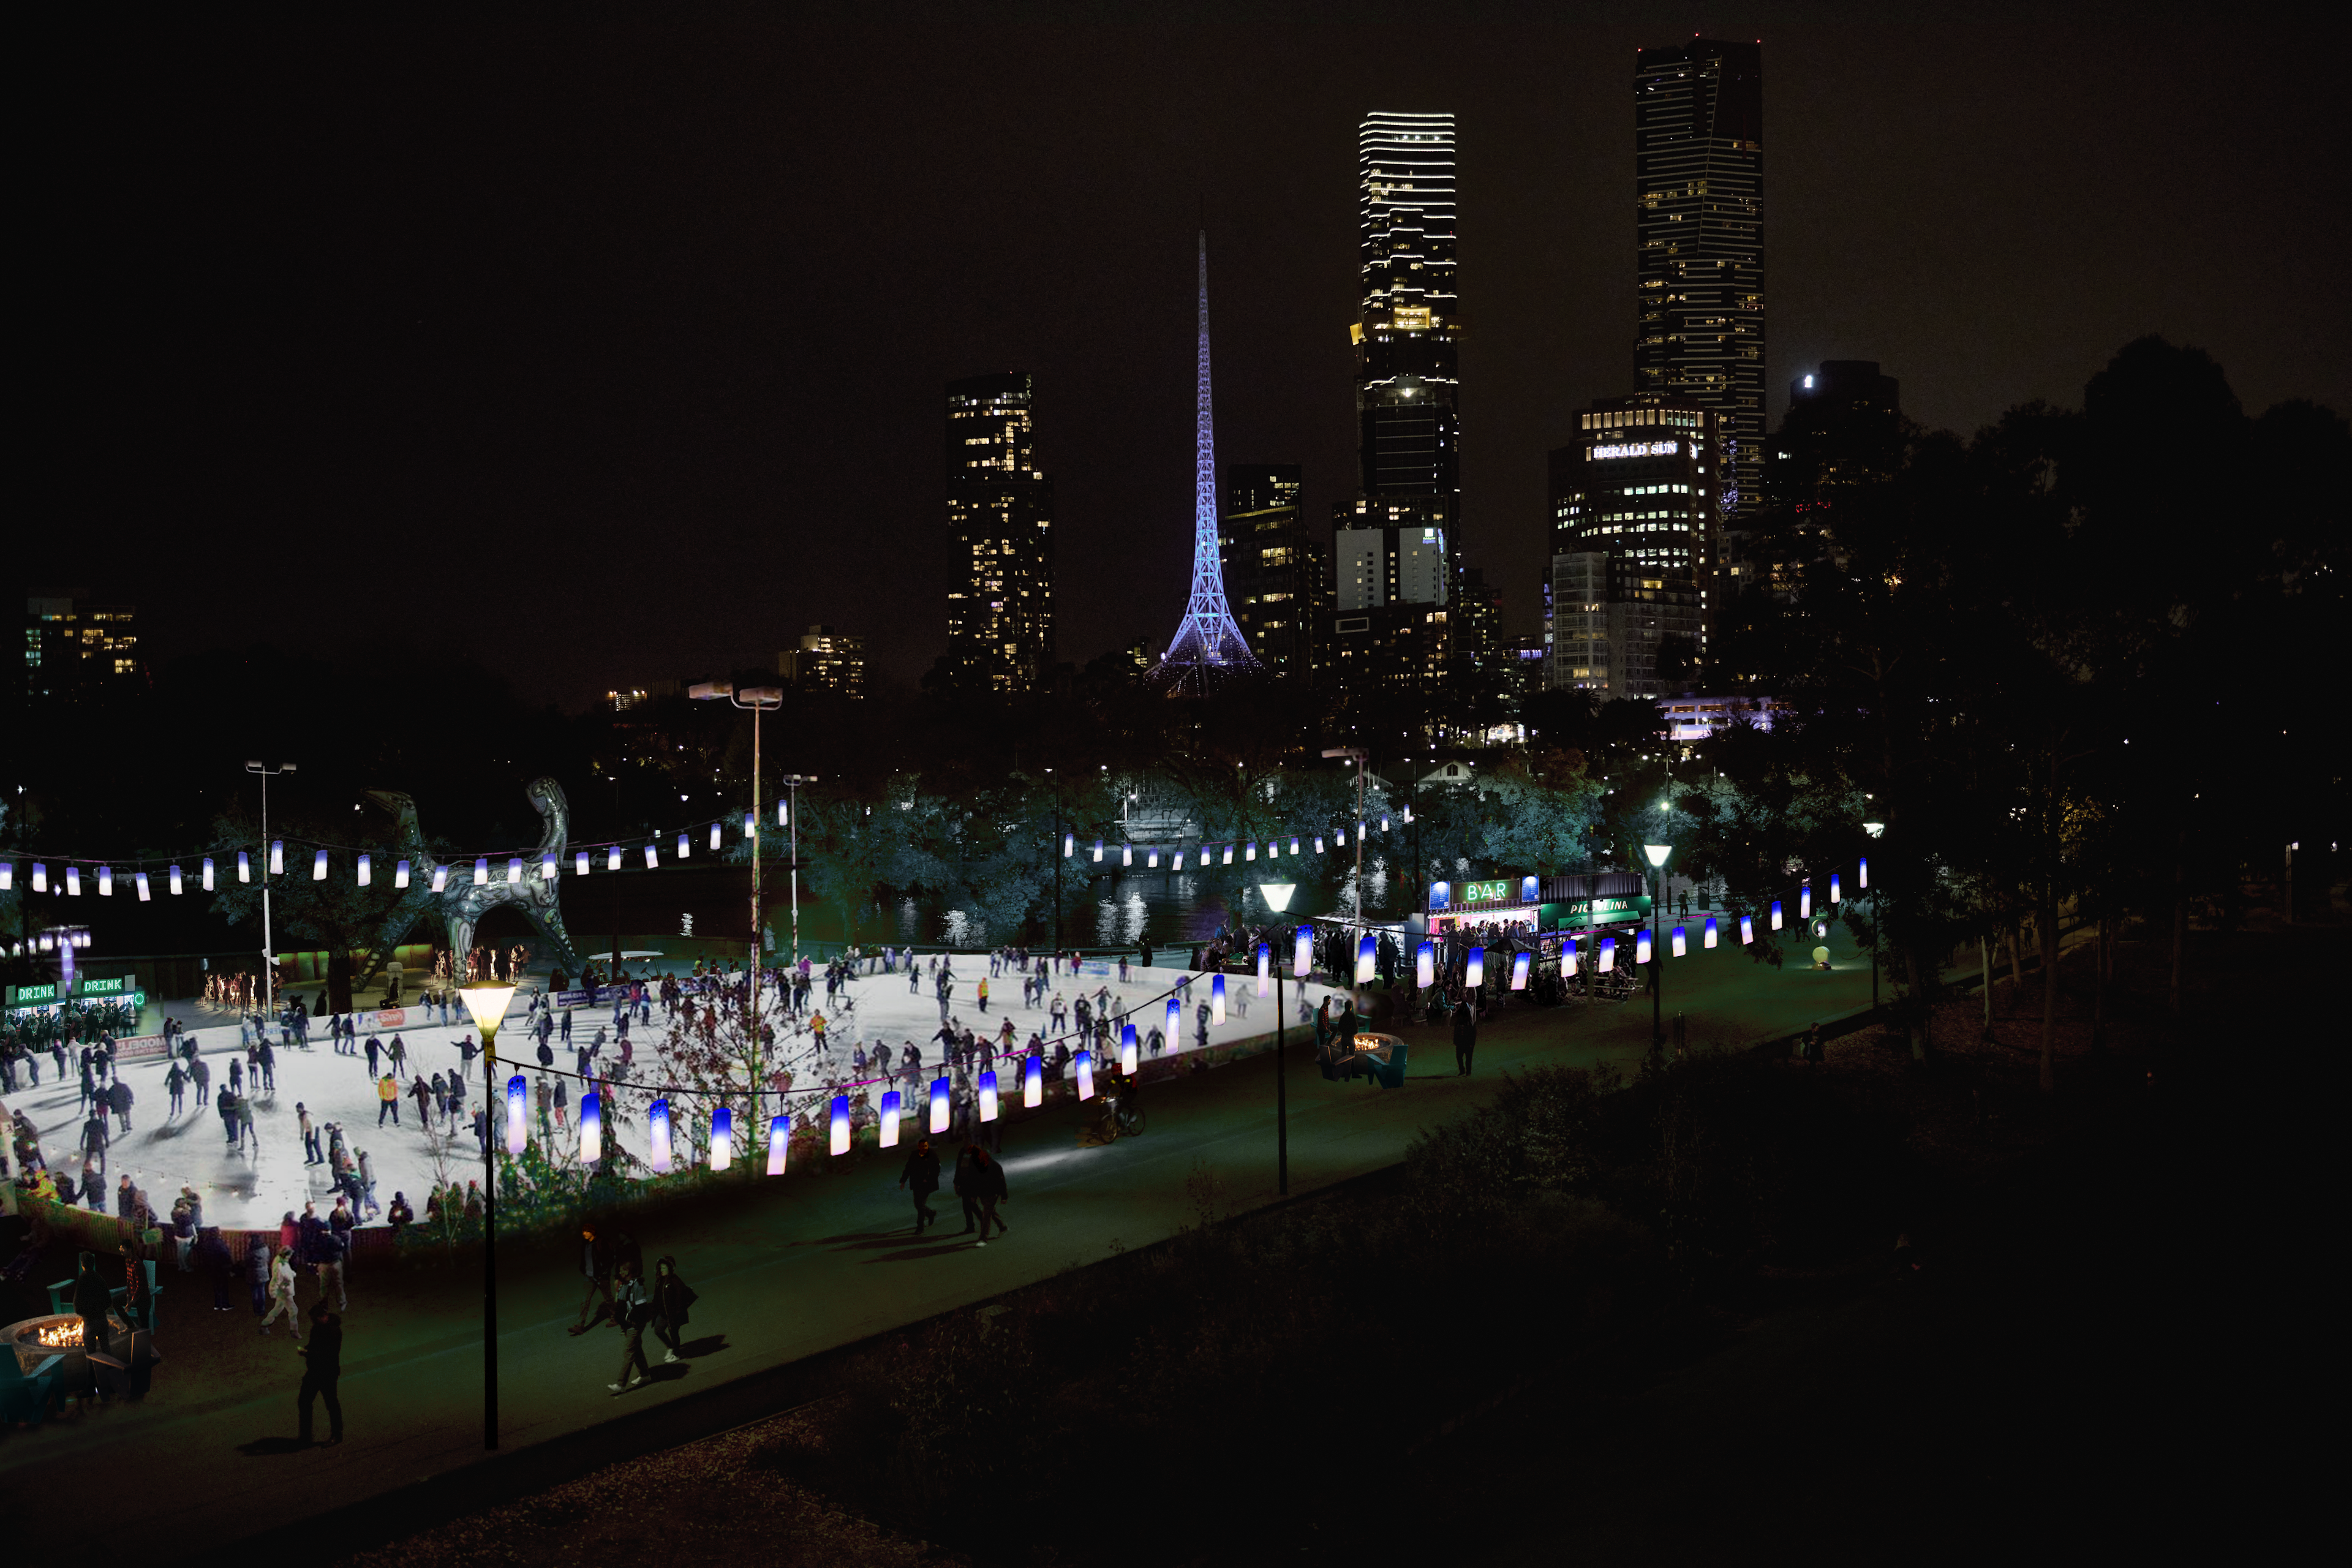 A large akating rink at night, with many people skating on it, surrounded by blue lanterns. The blue, lit-up Arts Centre spire and the Melbourne city skyline is visible in the background.